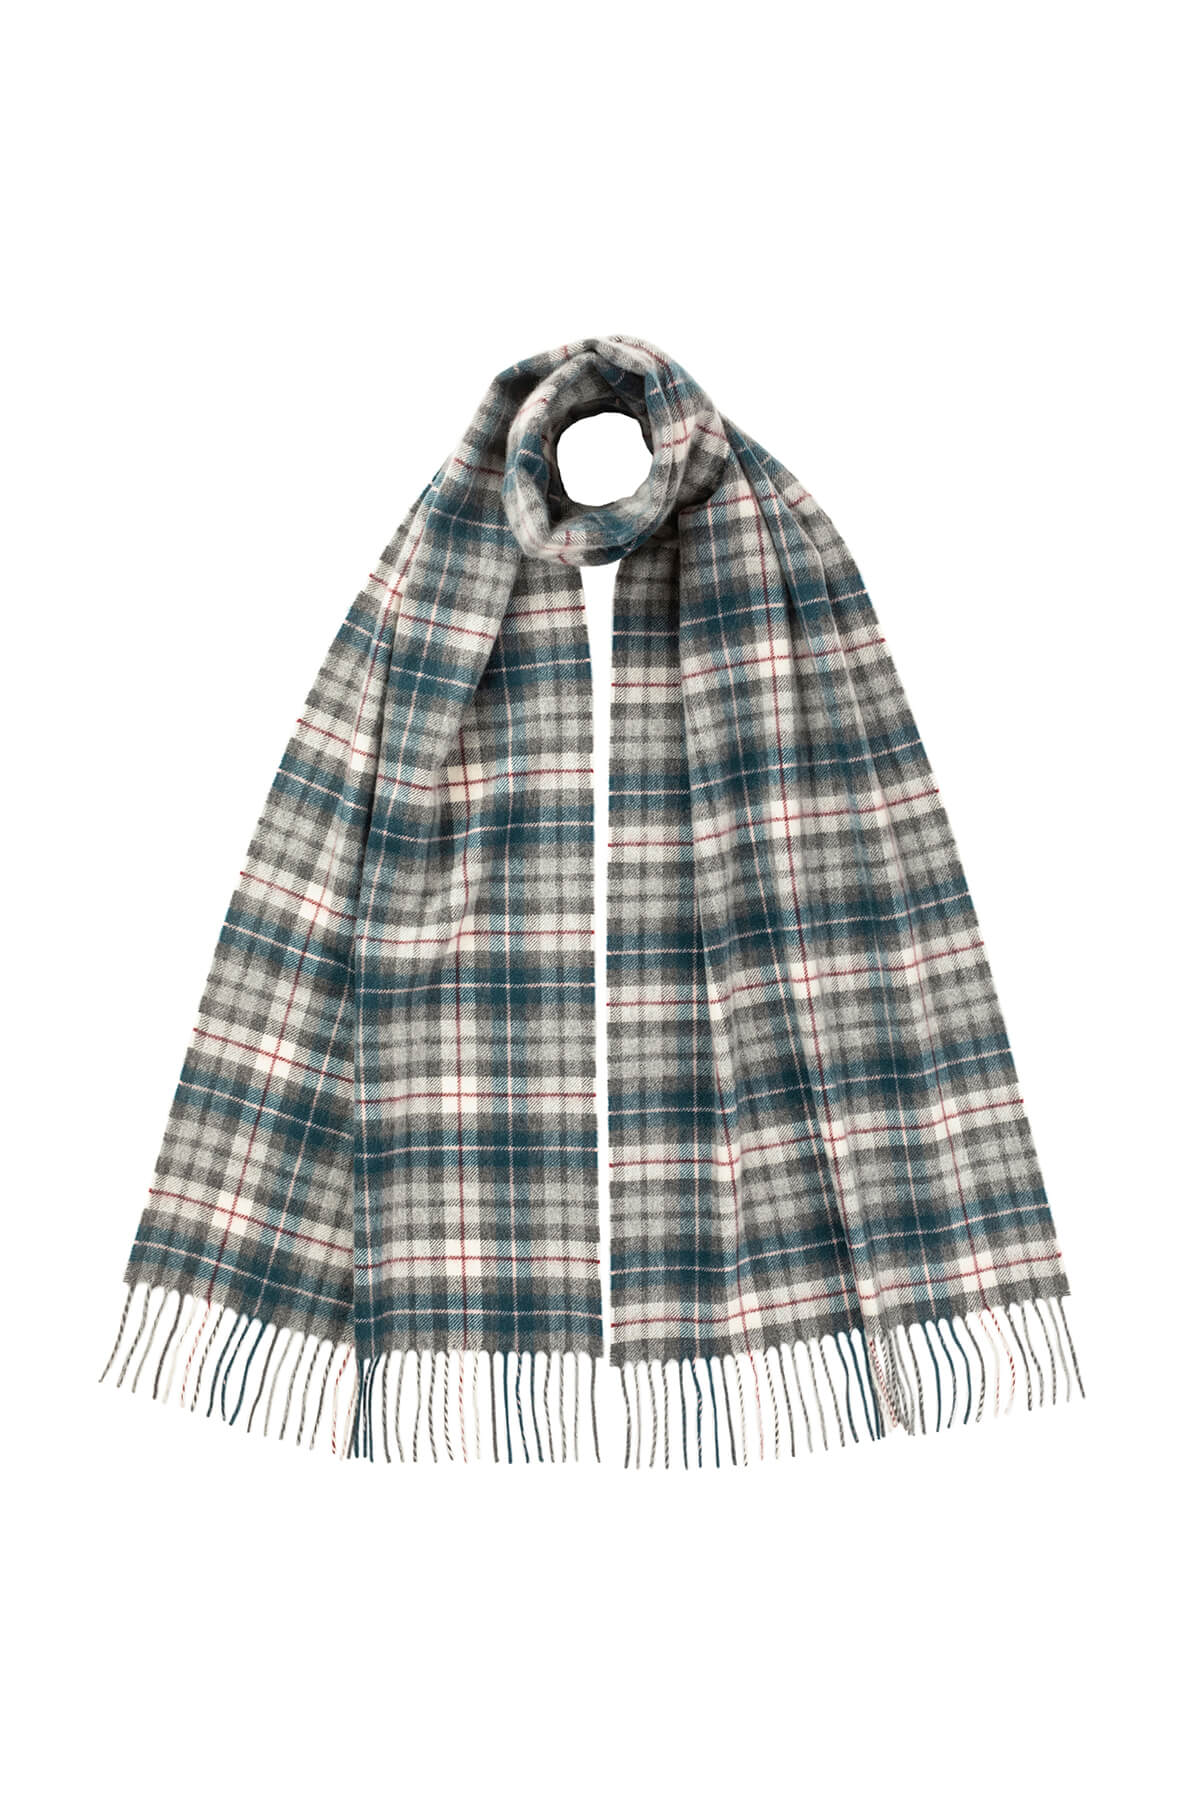 Johnstons of Elgin Small Check Cashmere Scarf in Mallard on a white background WA000057RU7331ONE